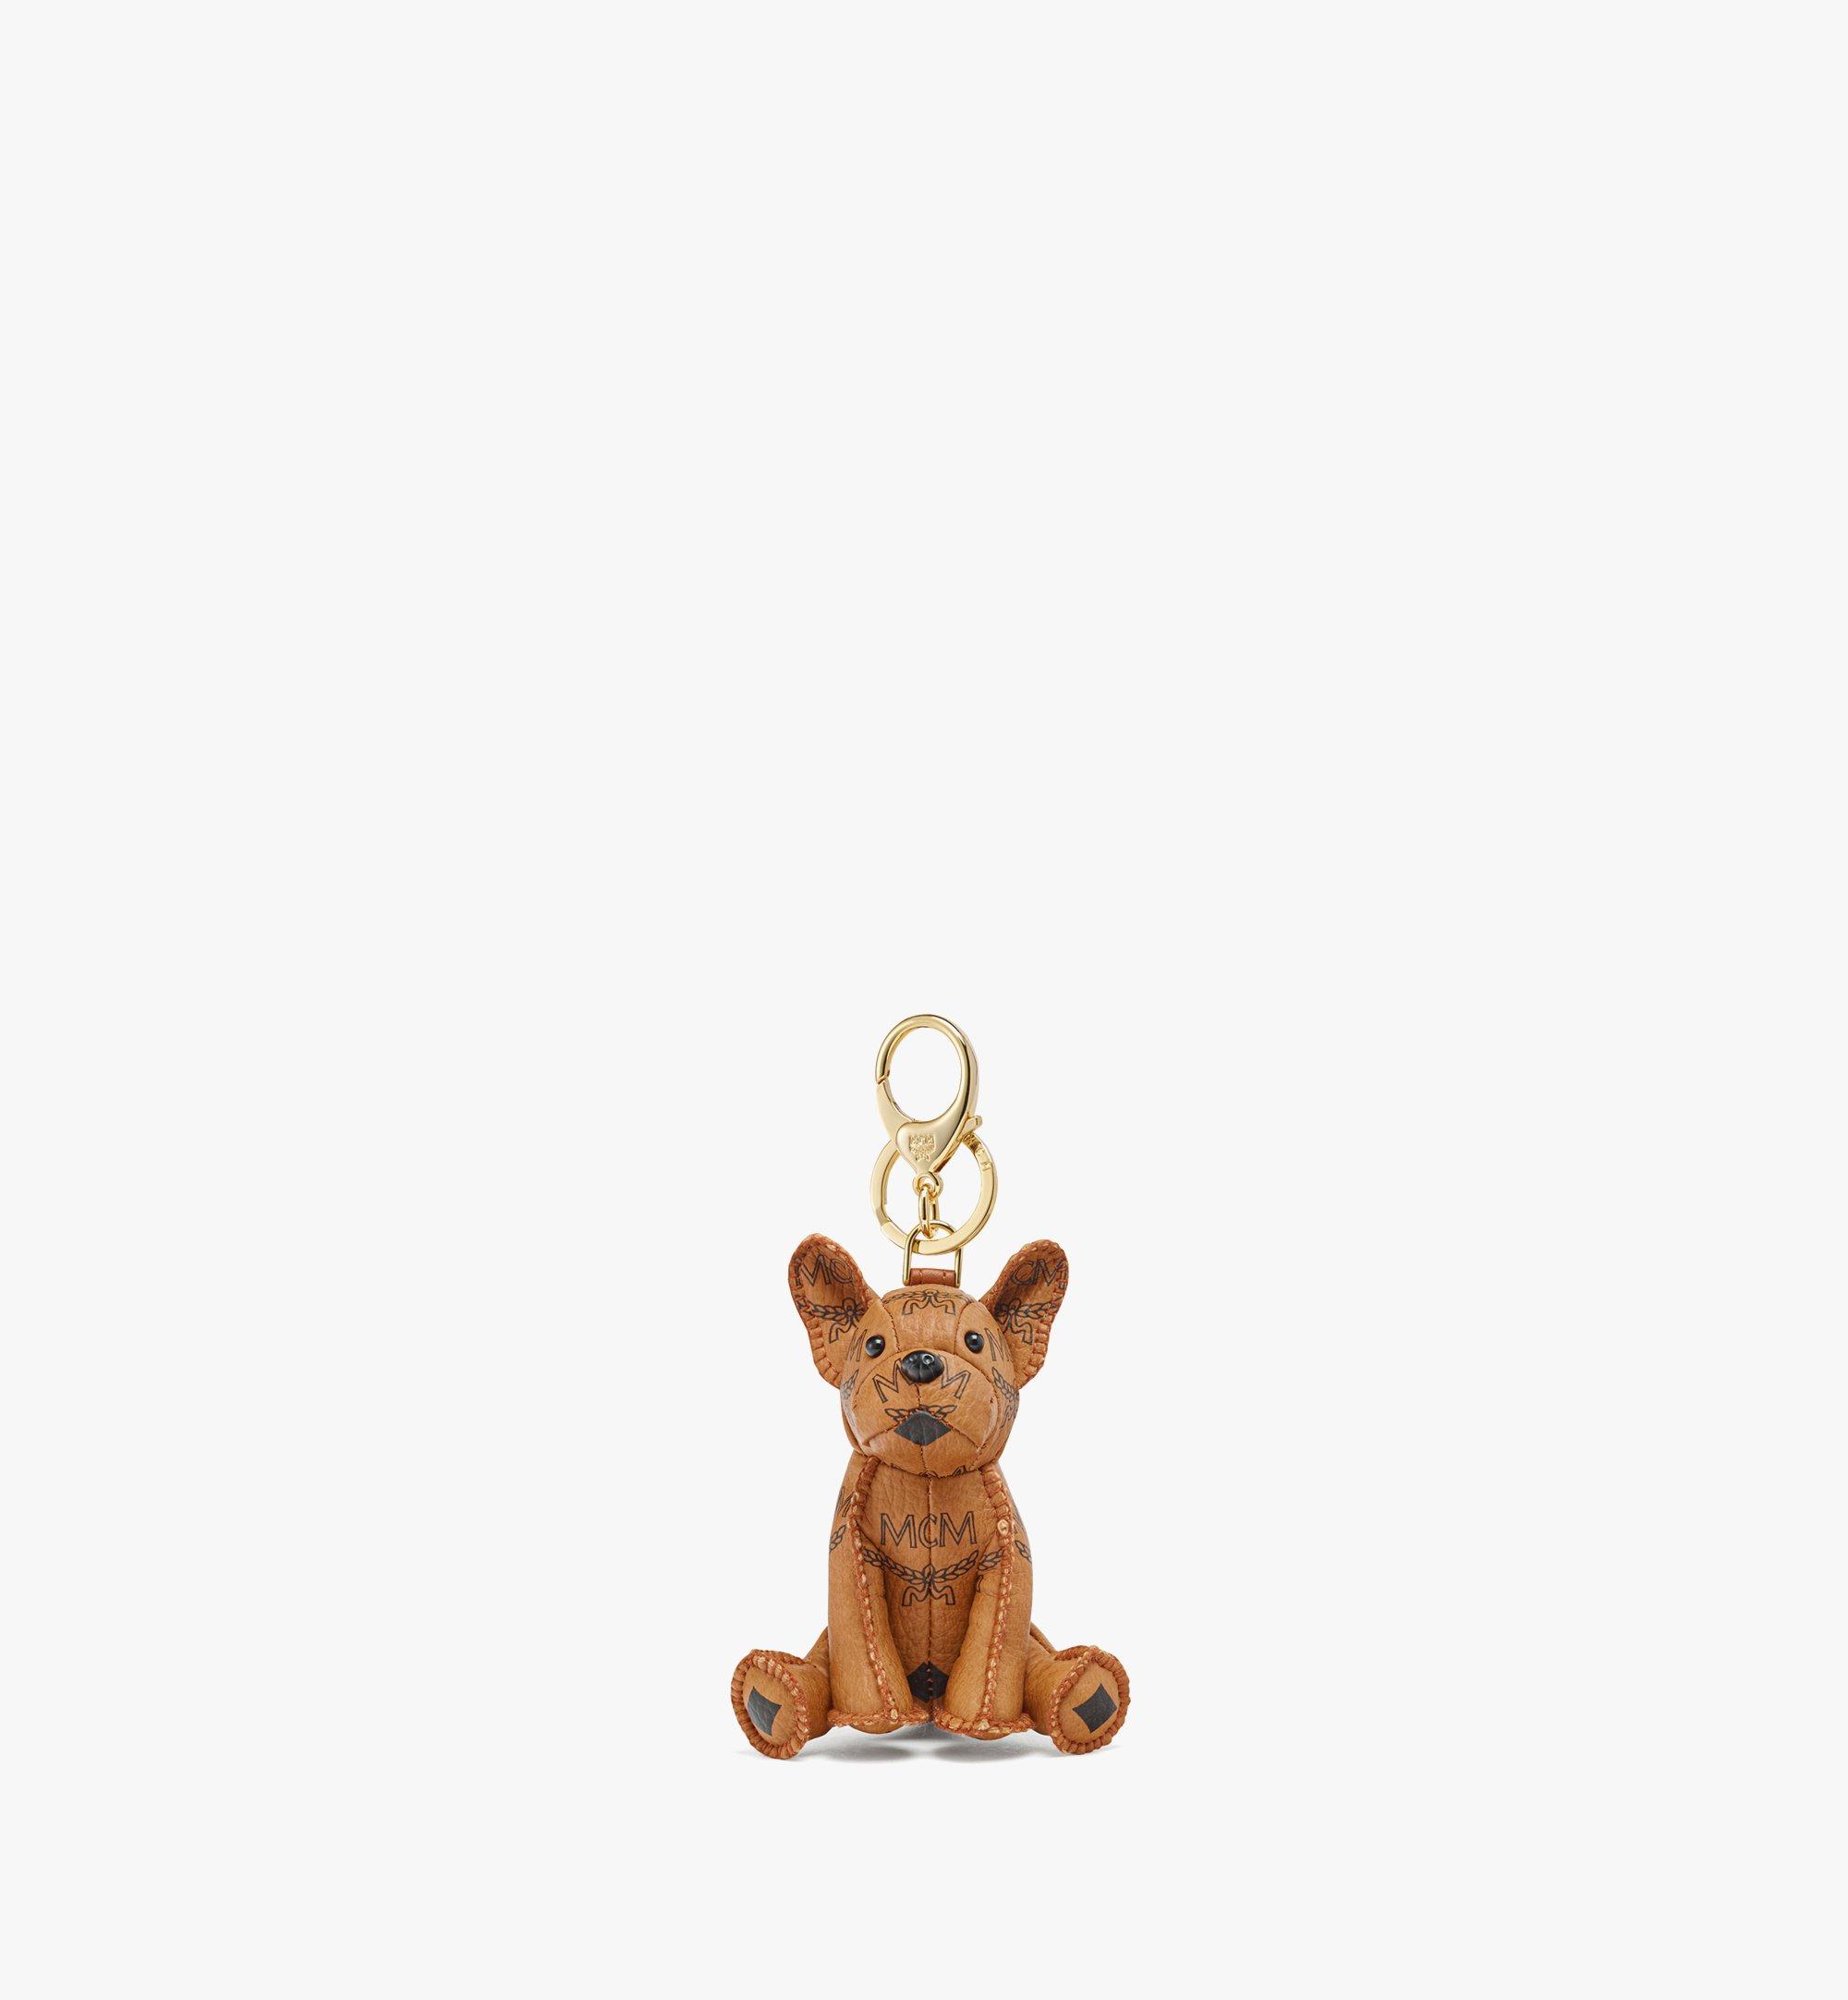 Designer Charms & Keyrings | Pup Charms & Pouches | MCM® US